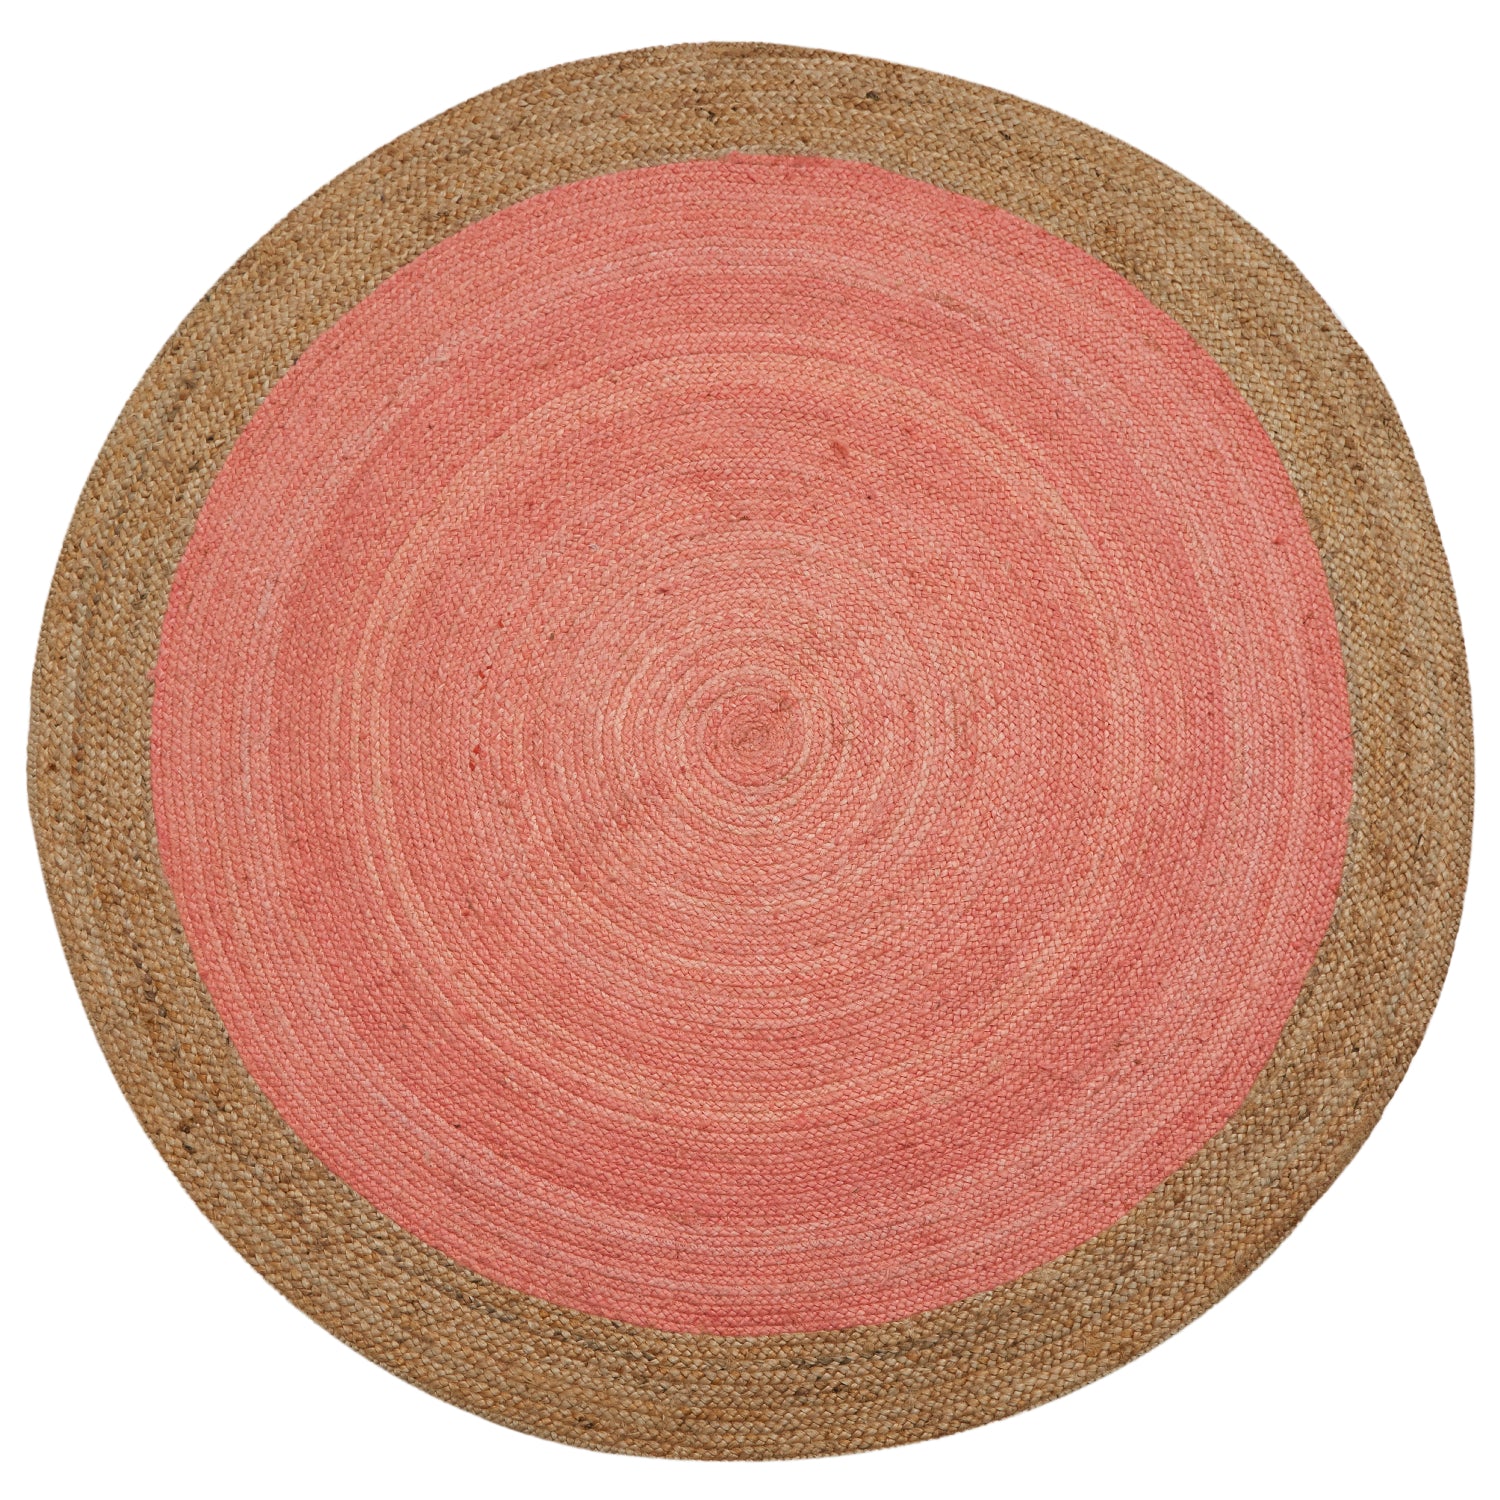 Milano soft jute rug with pale pink centre by Native